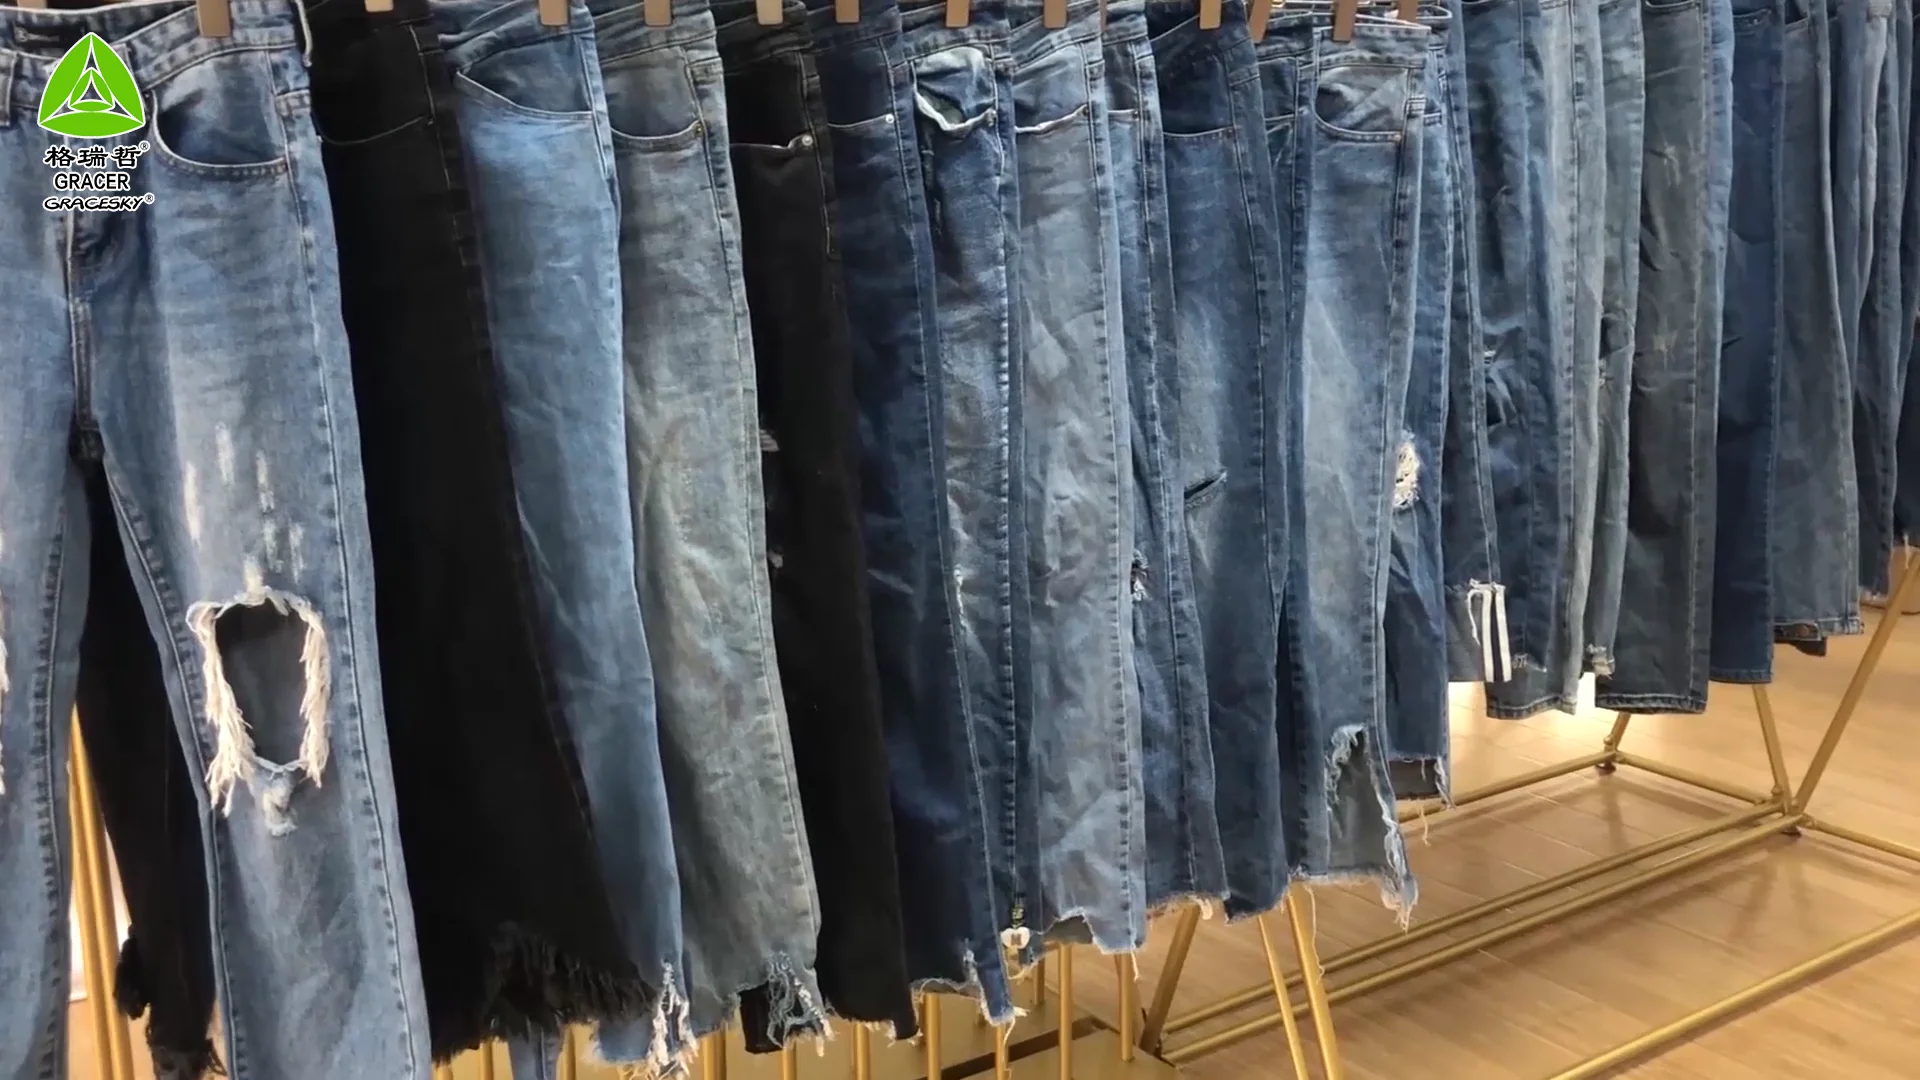 Used Denim Pants Used Clothing Second Hand Clothes In 100 Kg Bale - Buy  Used Clothing,Used Denim Pants,Second Hand Clothes Product on Alibaba.com